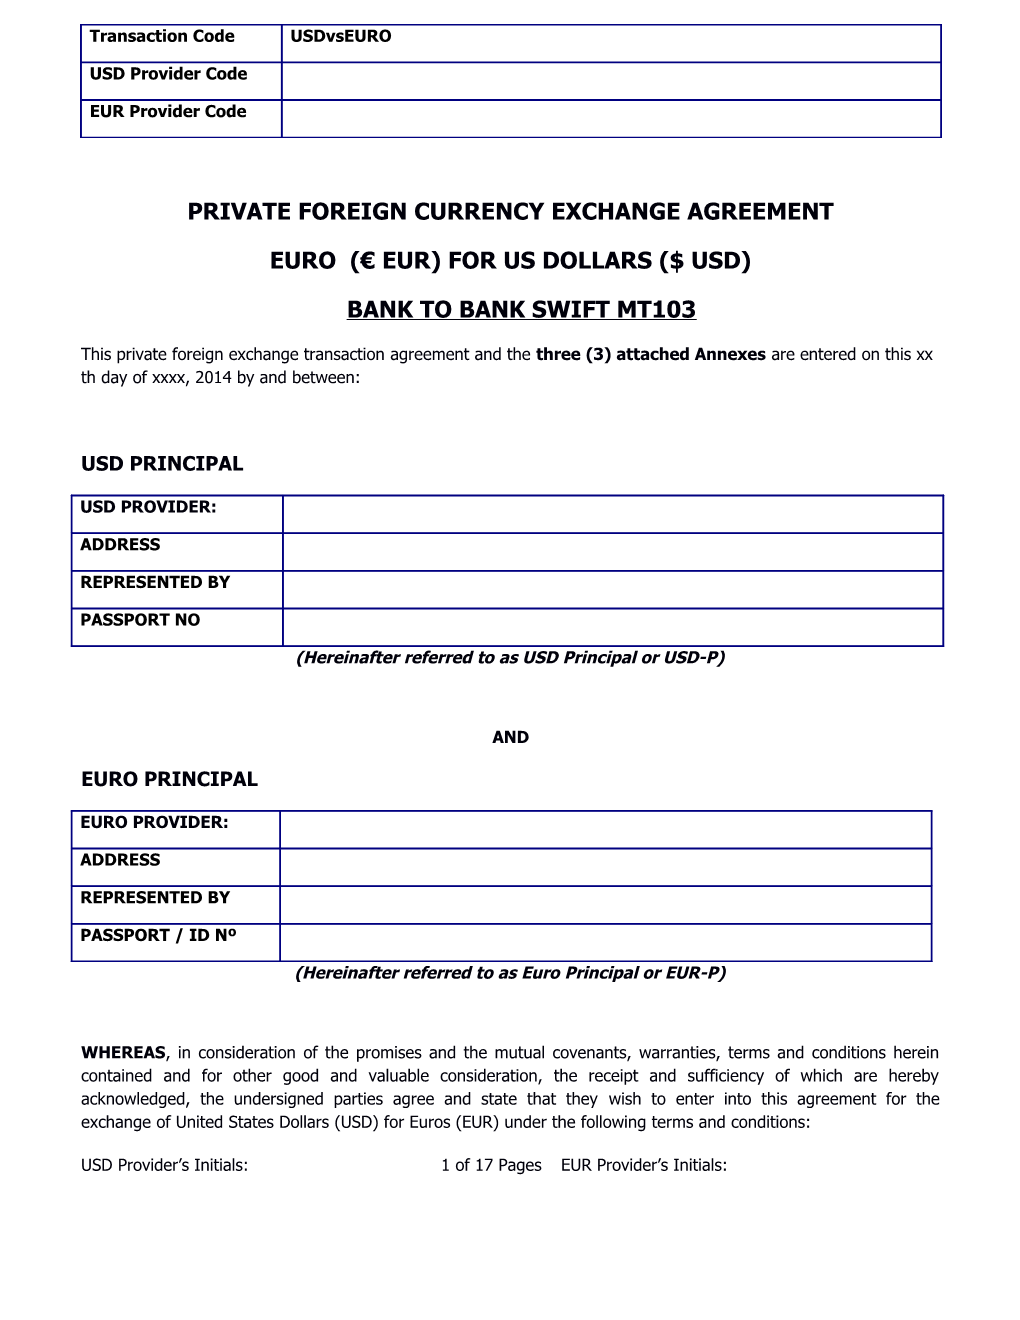 Private Foreign Currency Exchange Agreement